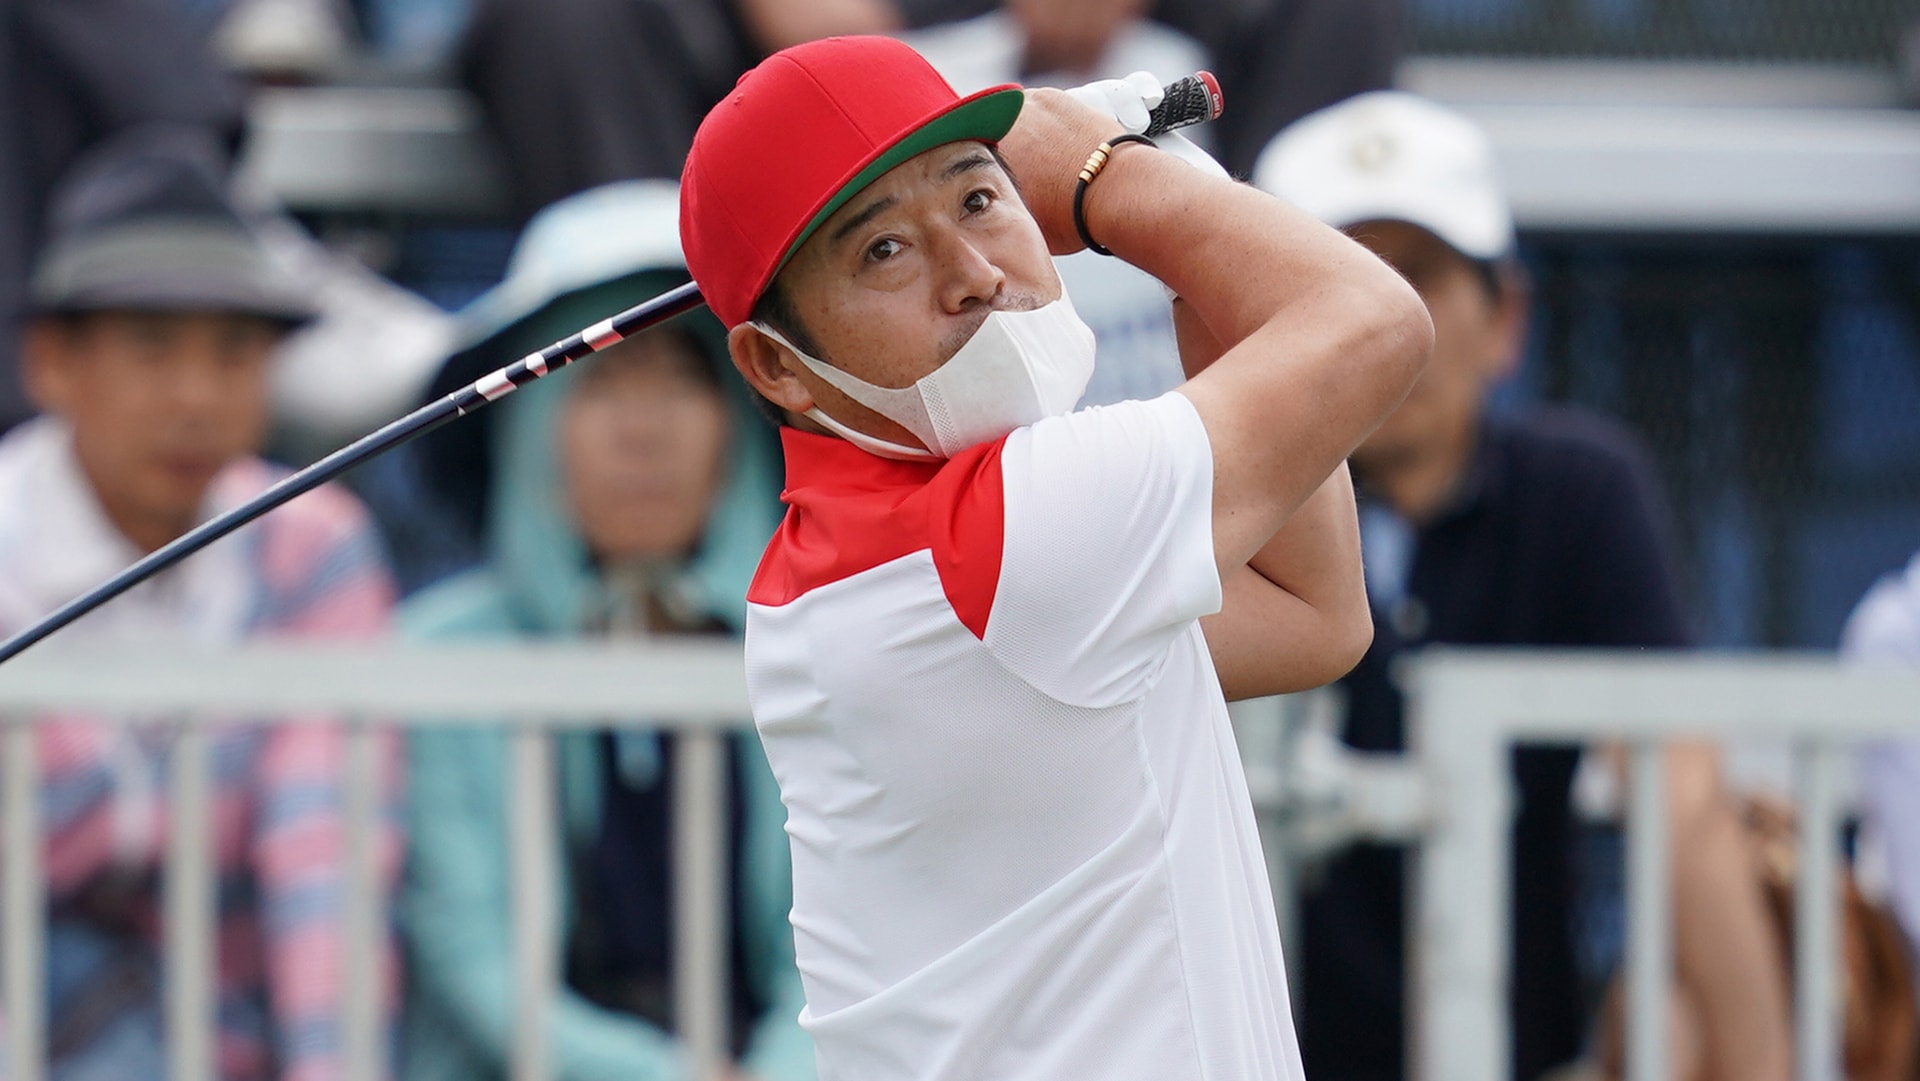 Hosung Choi whiffs with driver at Korea Tour event